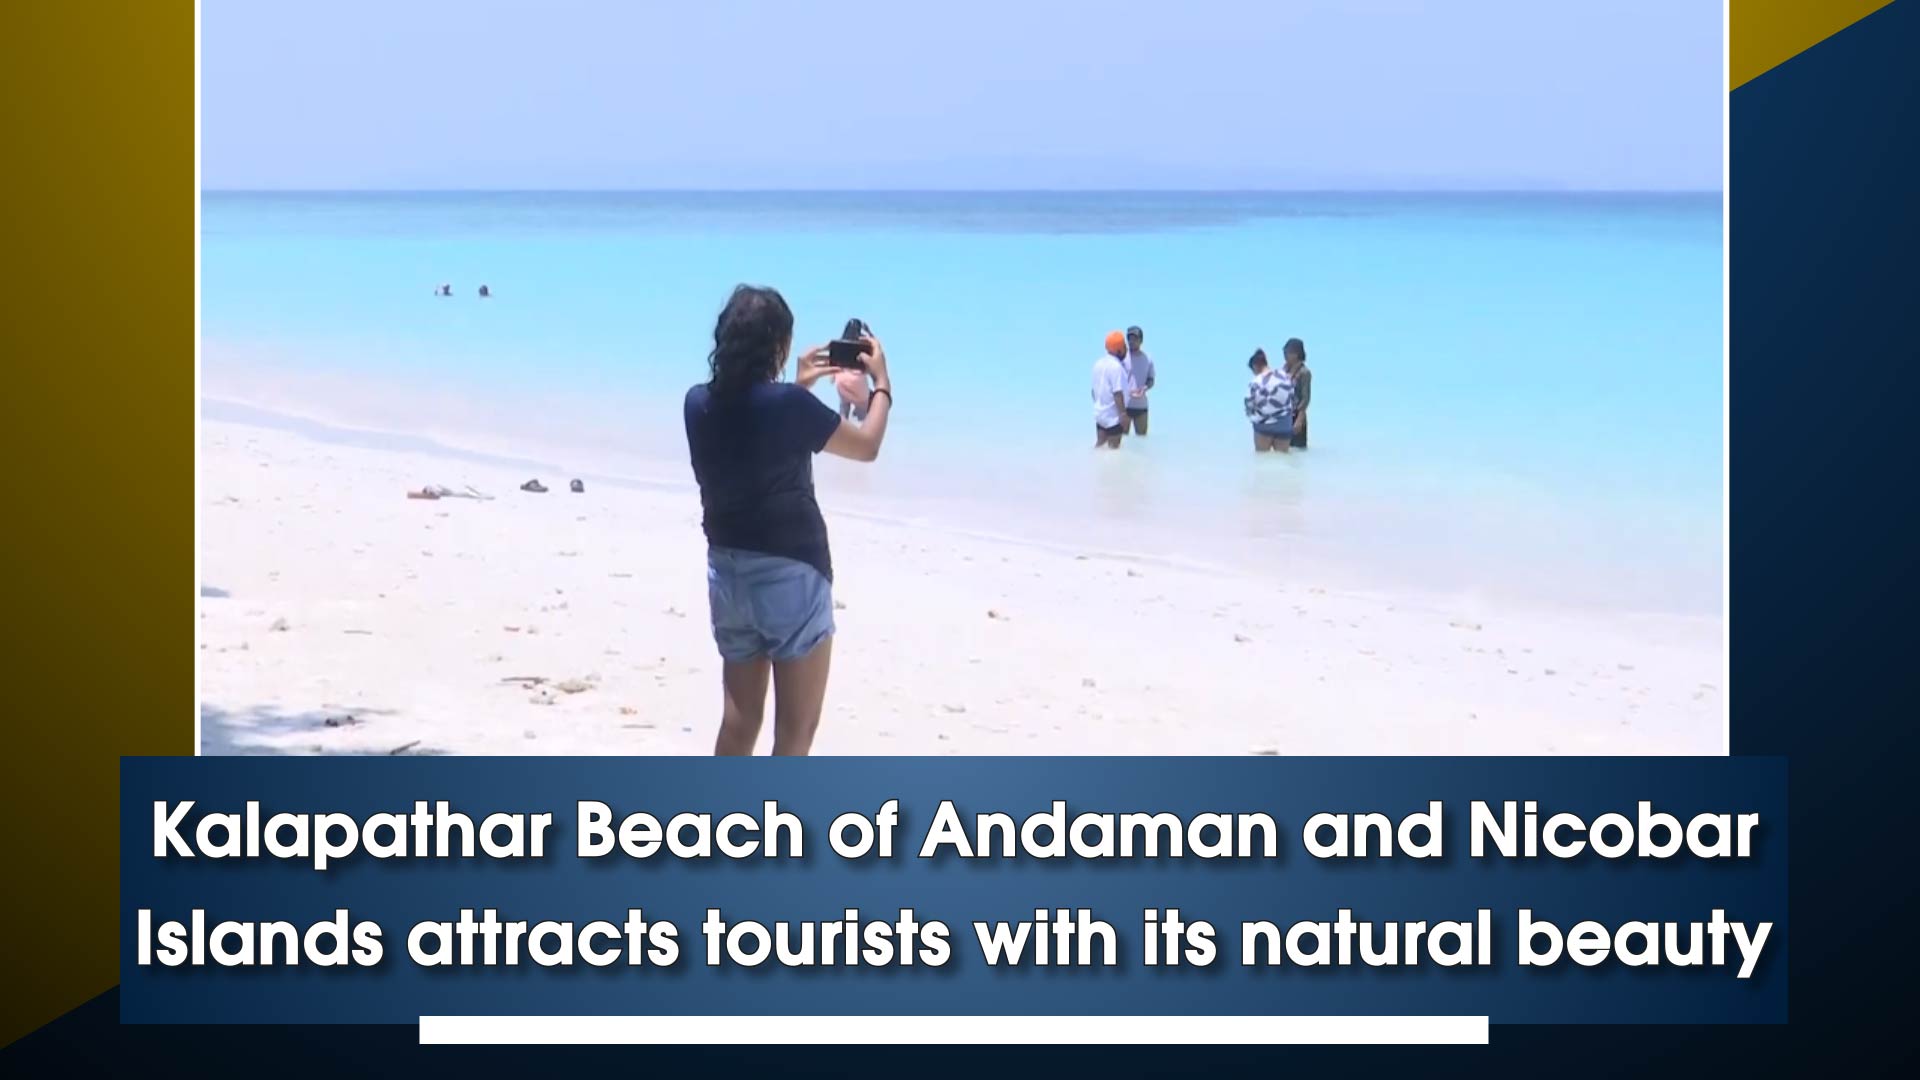 Kalapathar Beach of Andaman and Nicobar Islands attracts tourists with its natural beauty